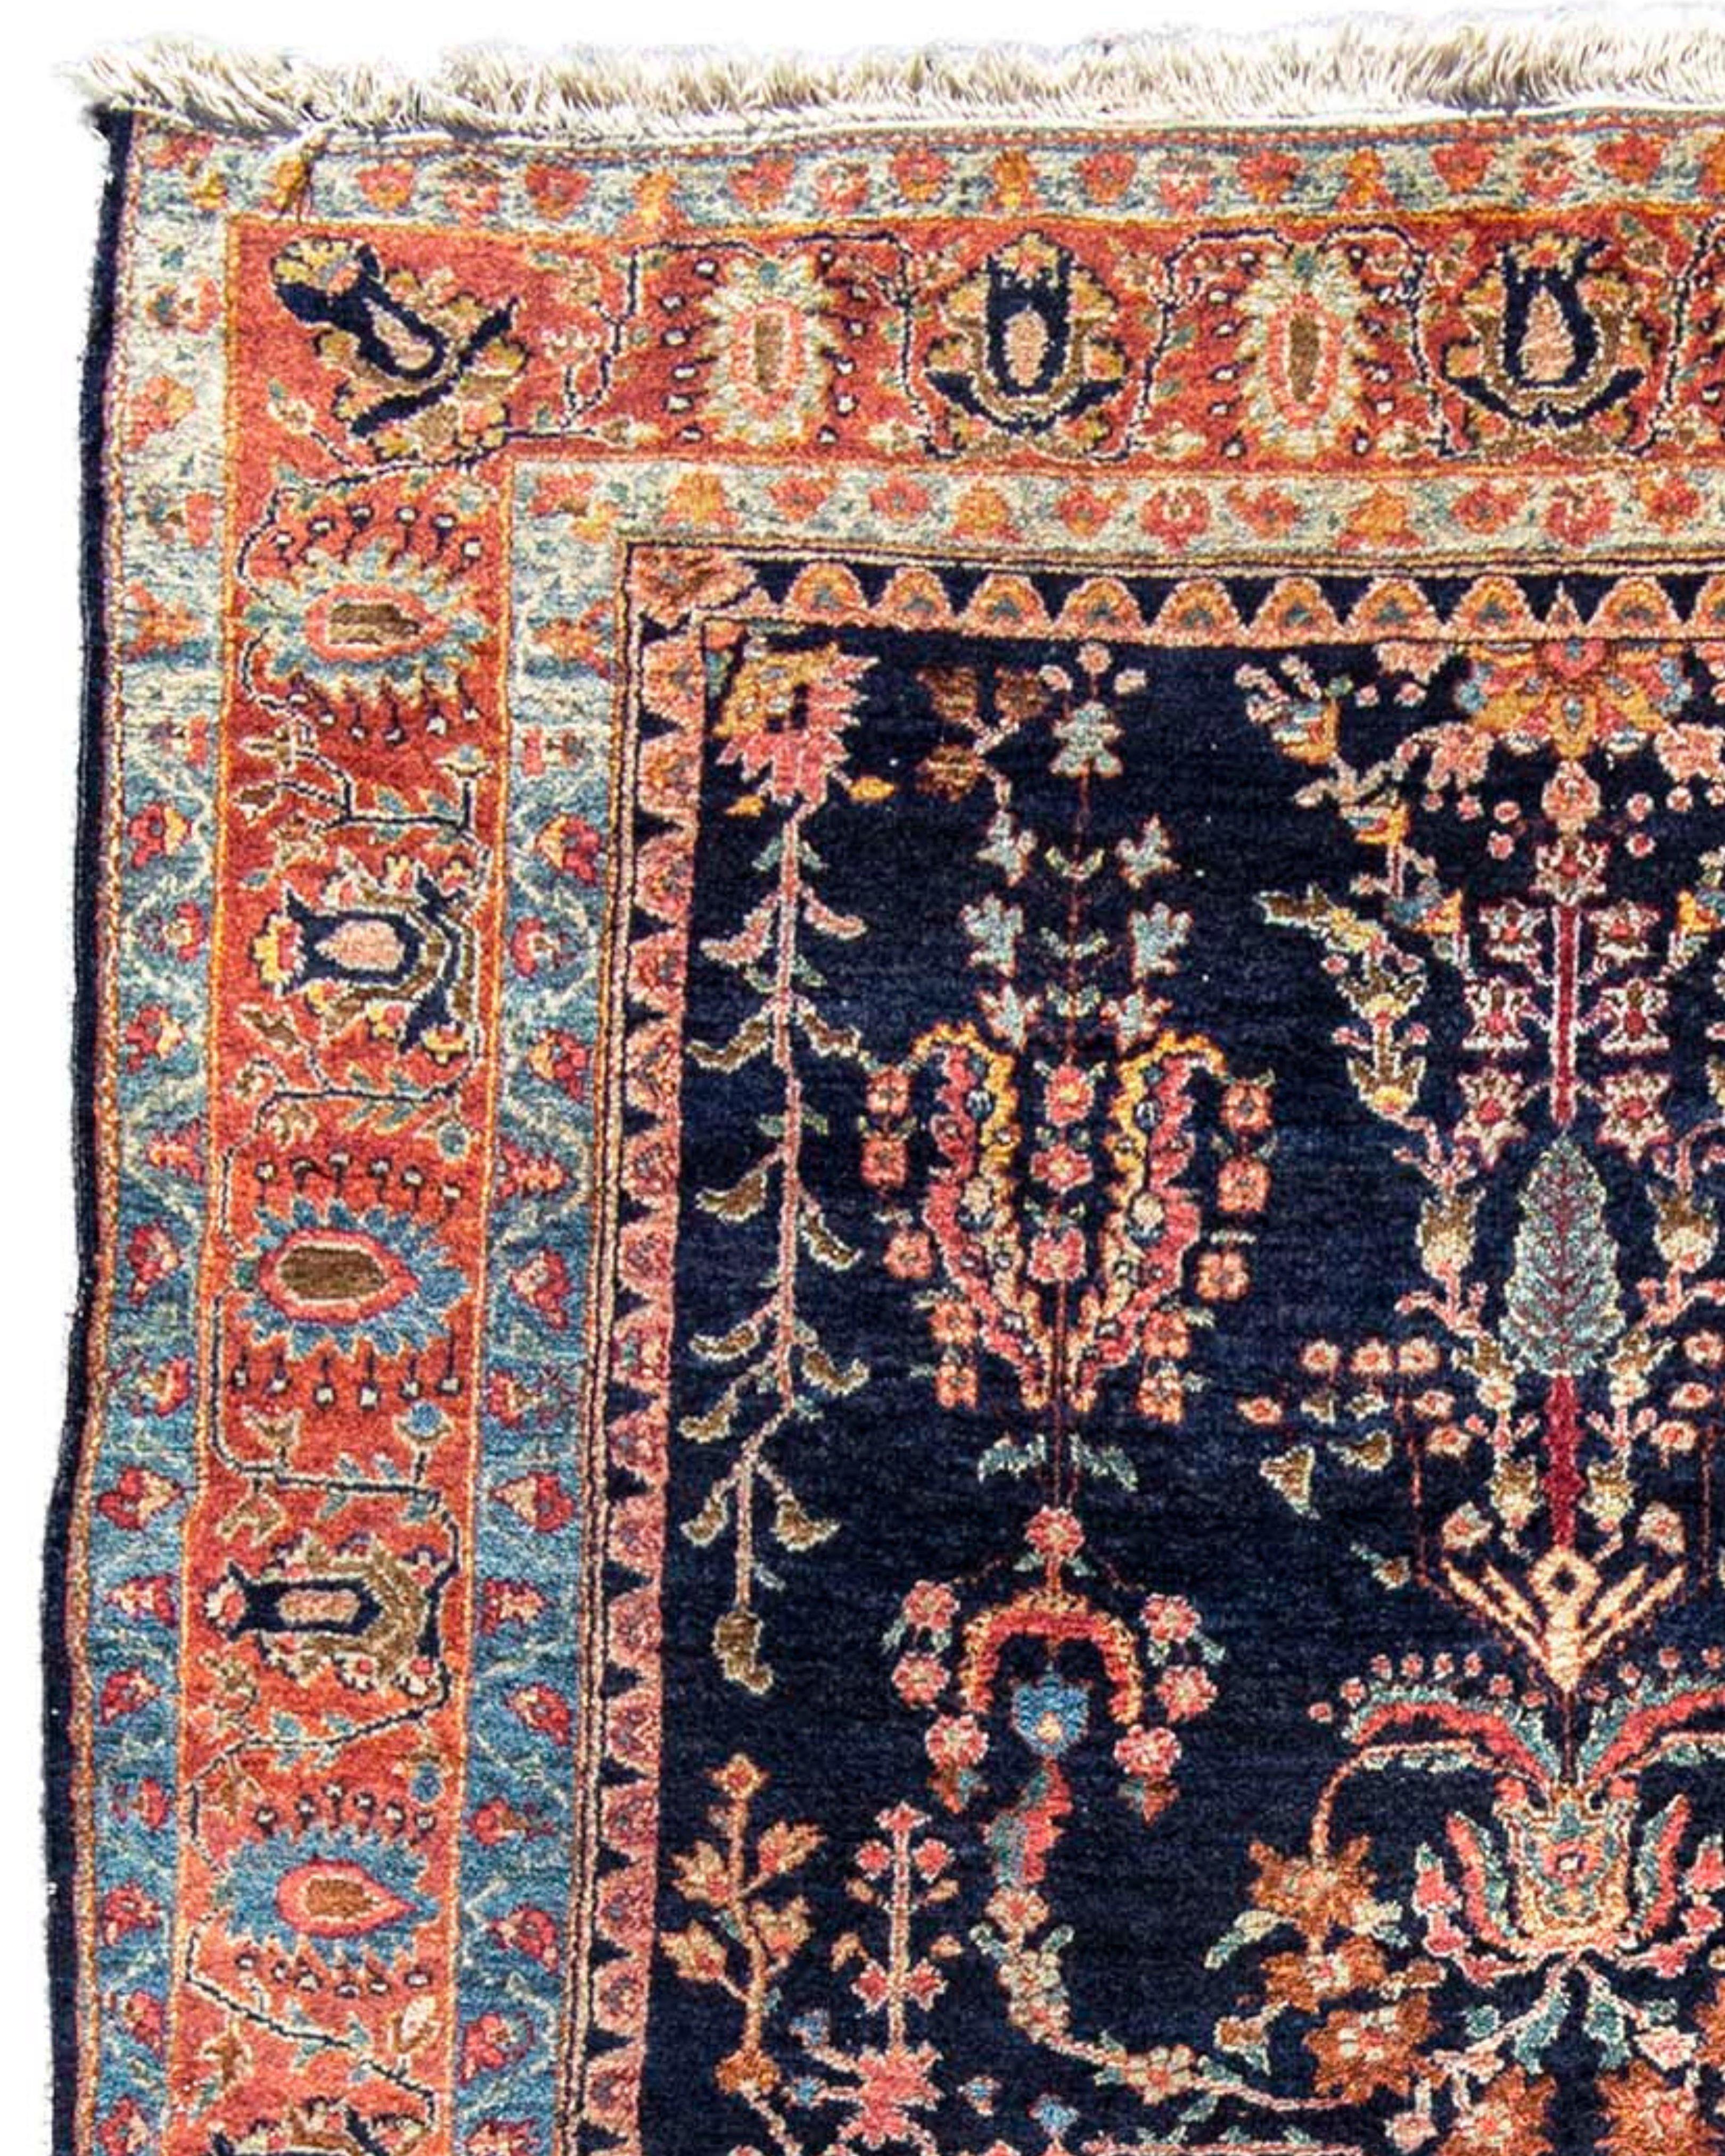 Hand-Woven Antique Persian Fereghan Sarouk Rug, c. 1900 For Sale